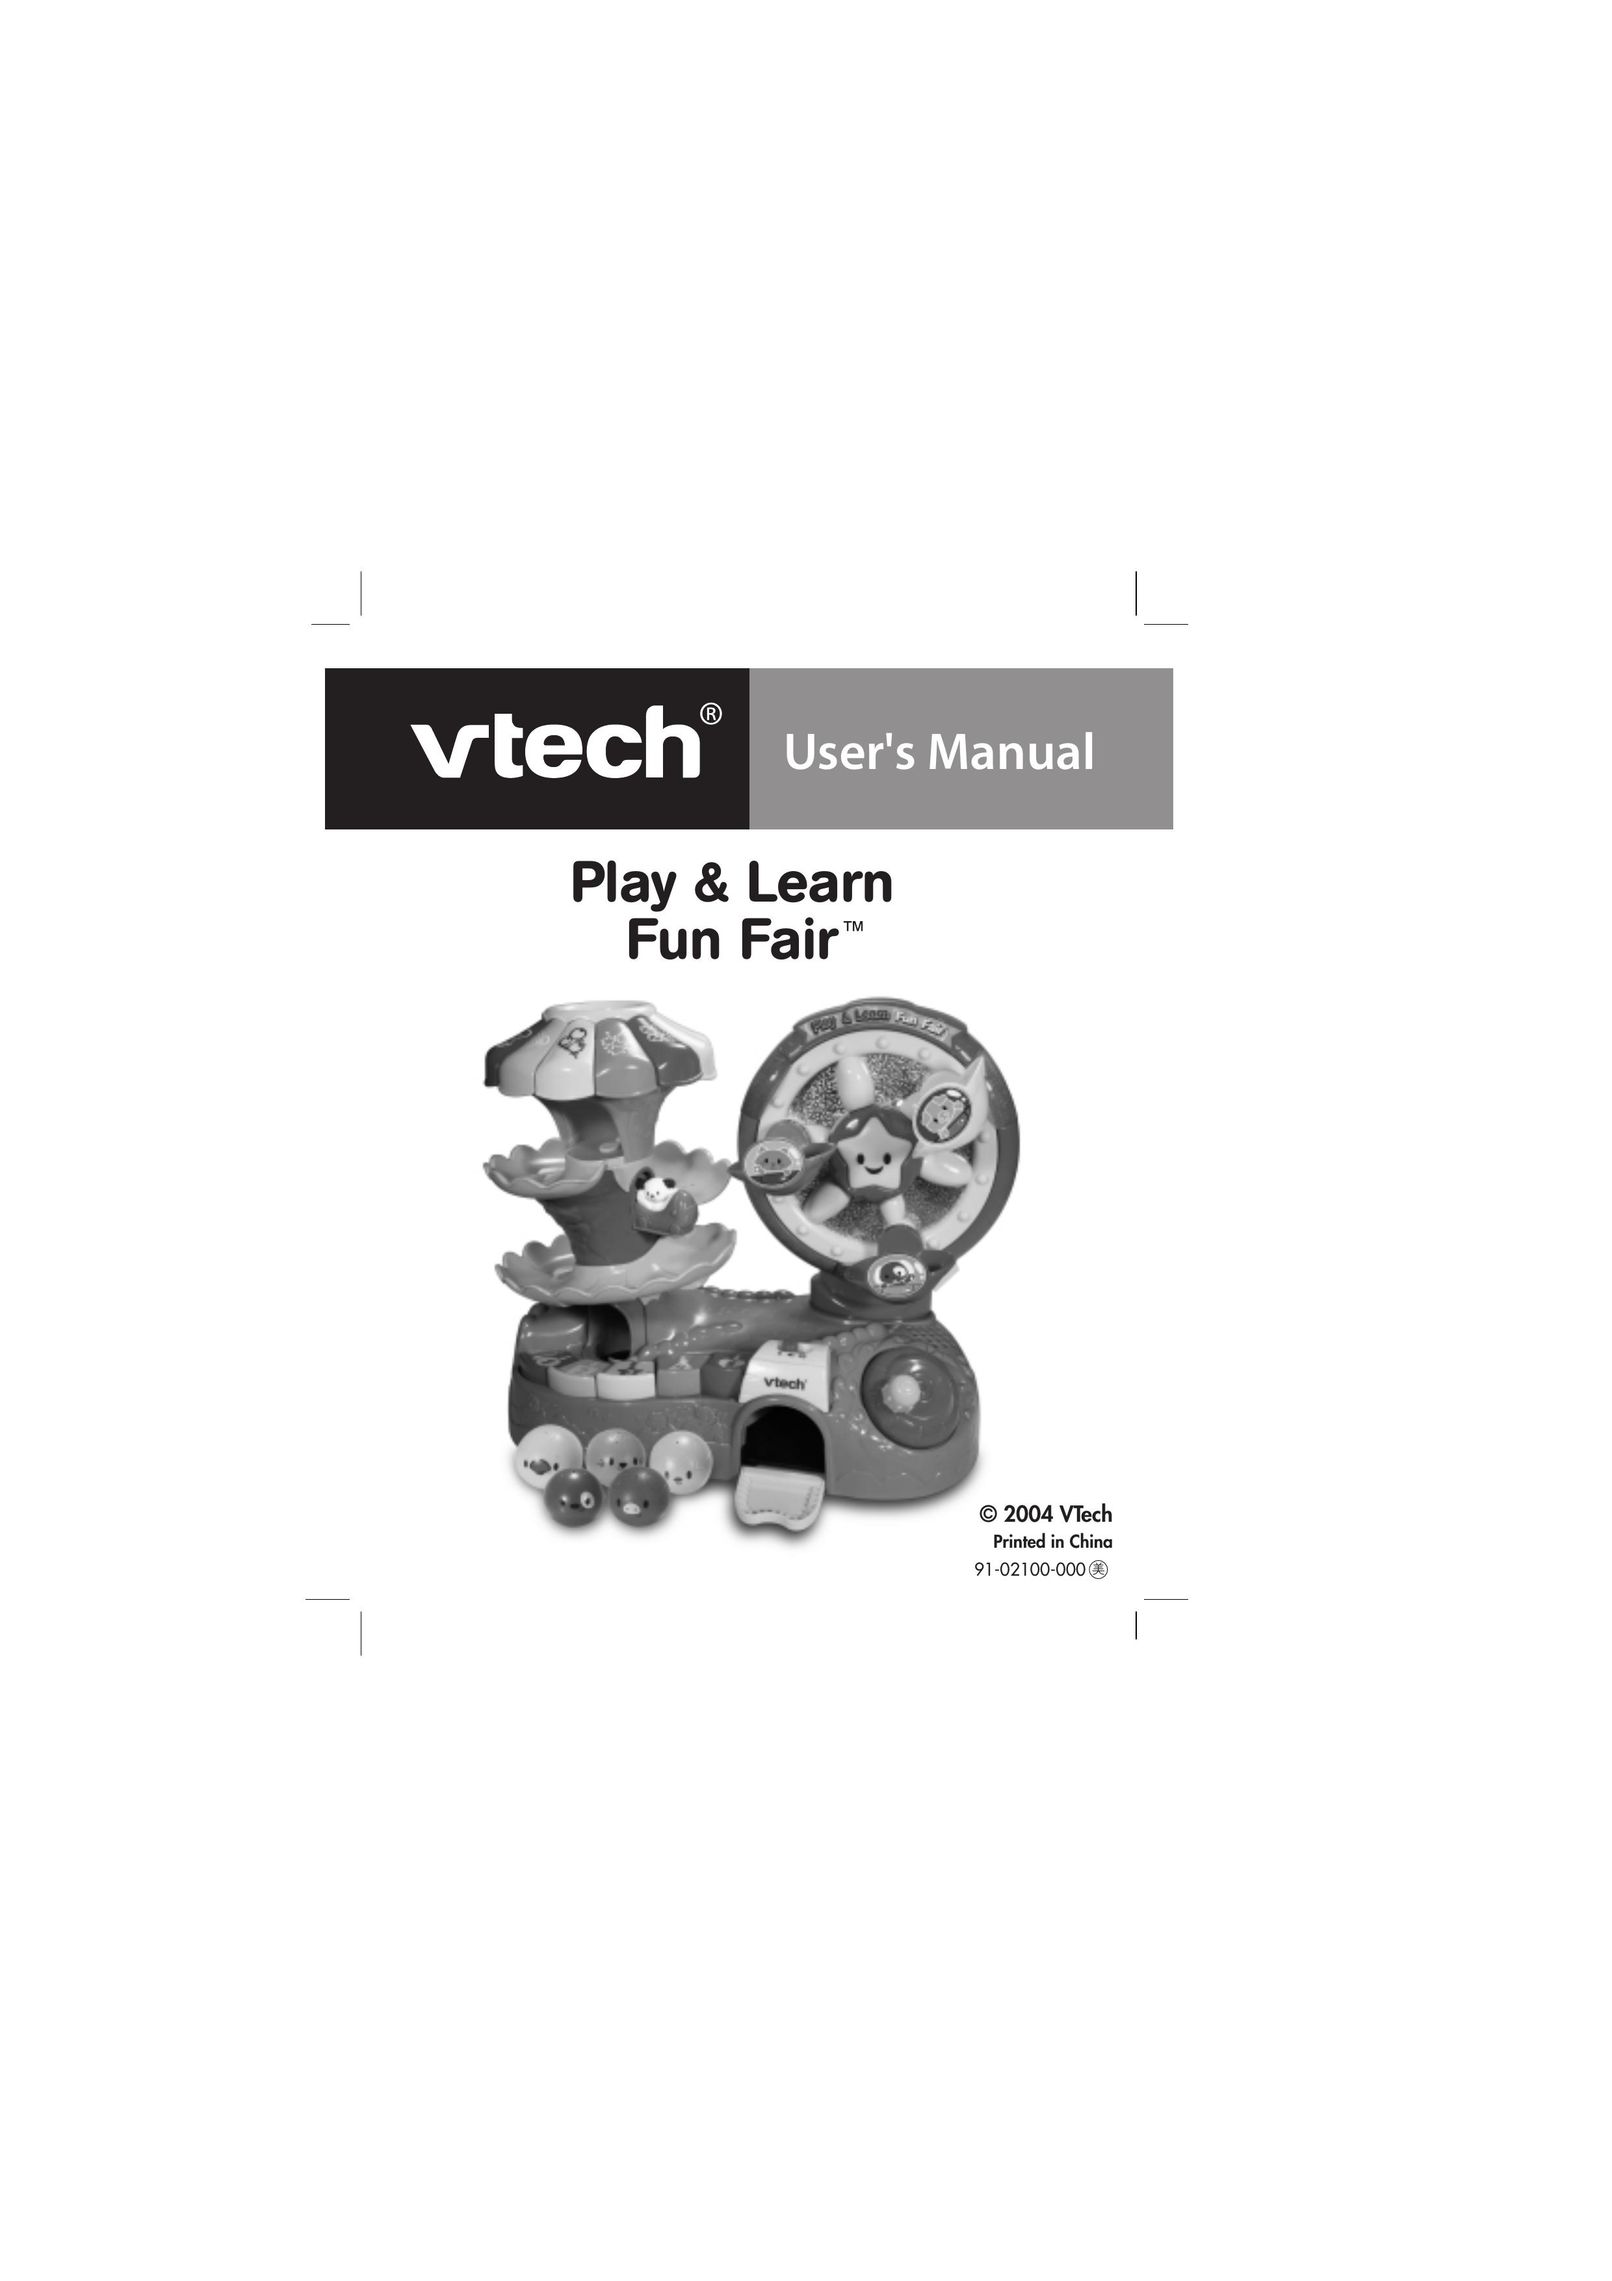 VTech 91-02100-000 Baby Toy User Manual